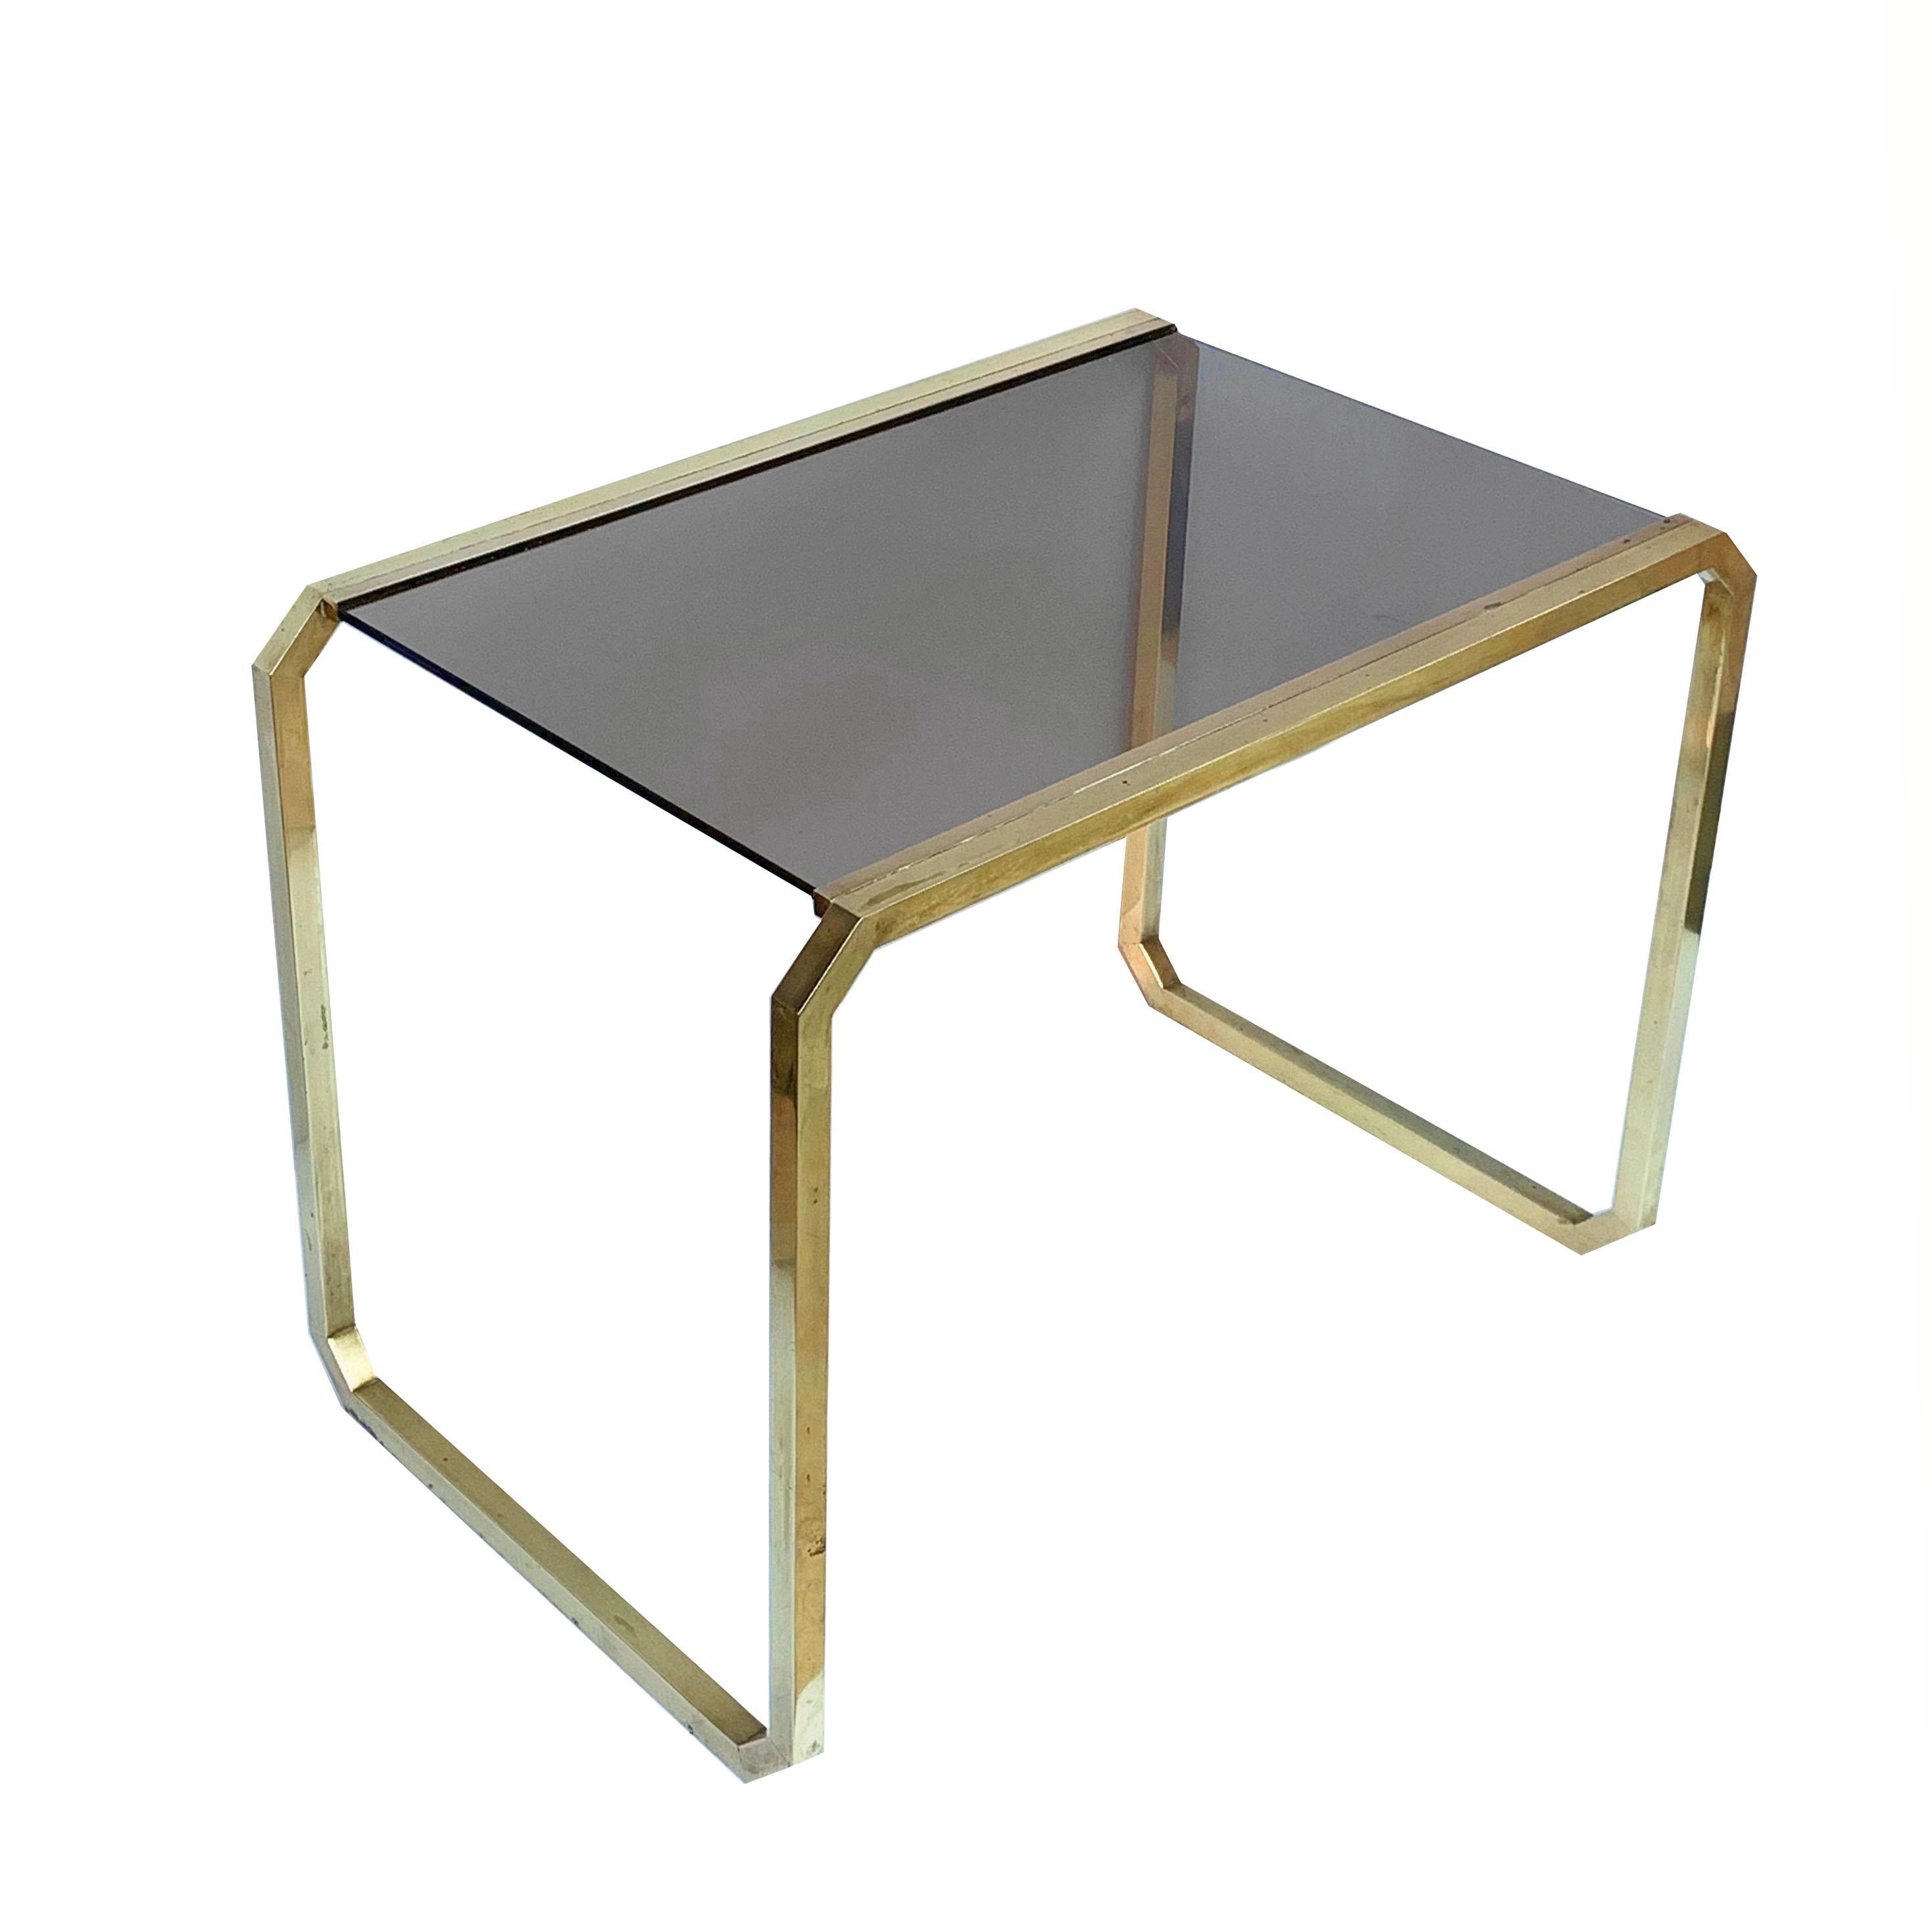 Late 20th Century Romeo Rega style Coffee Table in Brass and Smoked Glass, Italy, 1970s Midcentury For Sale